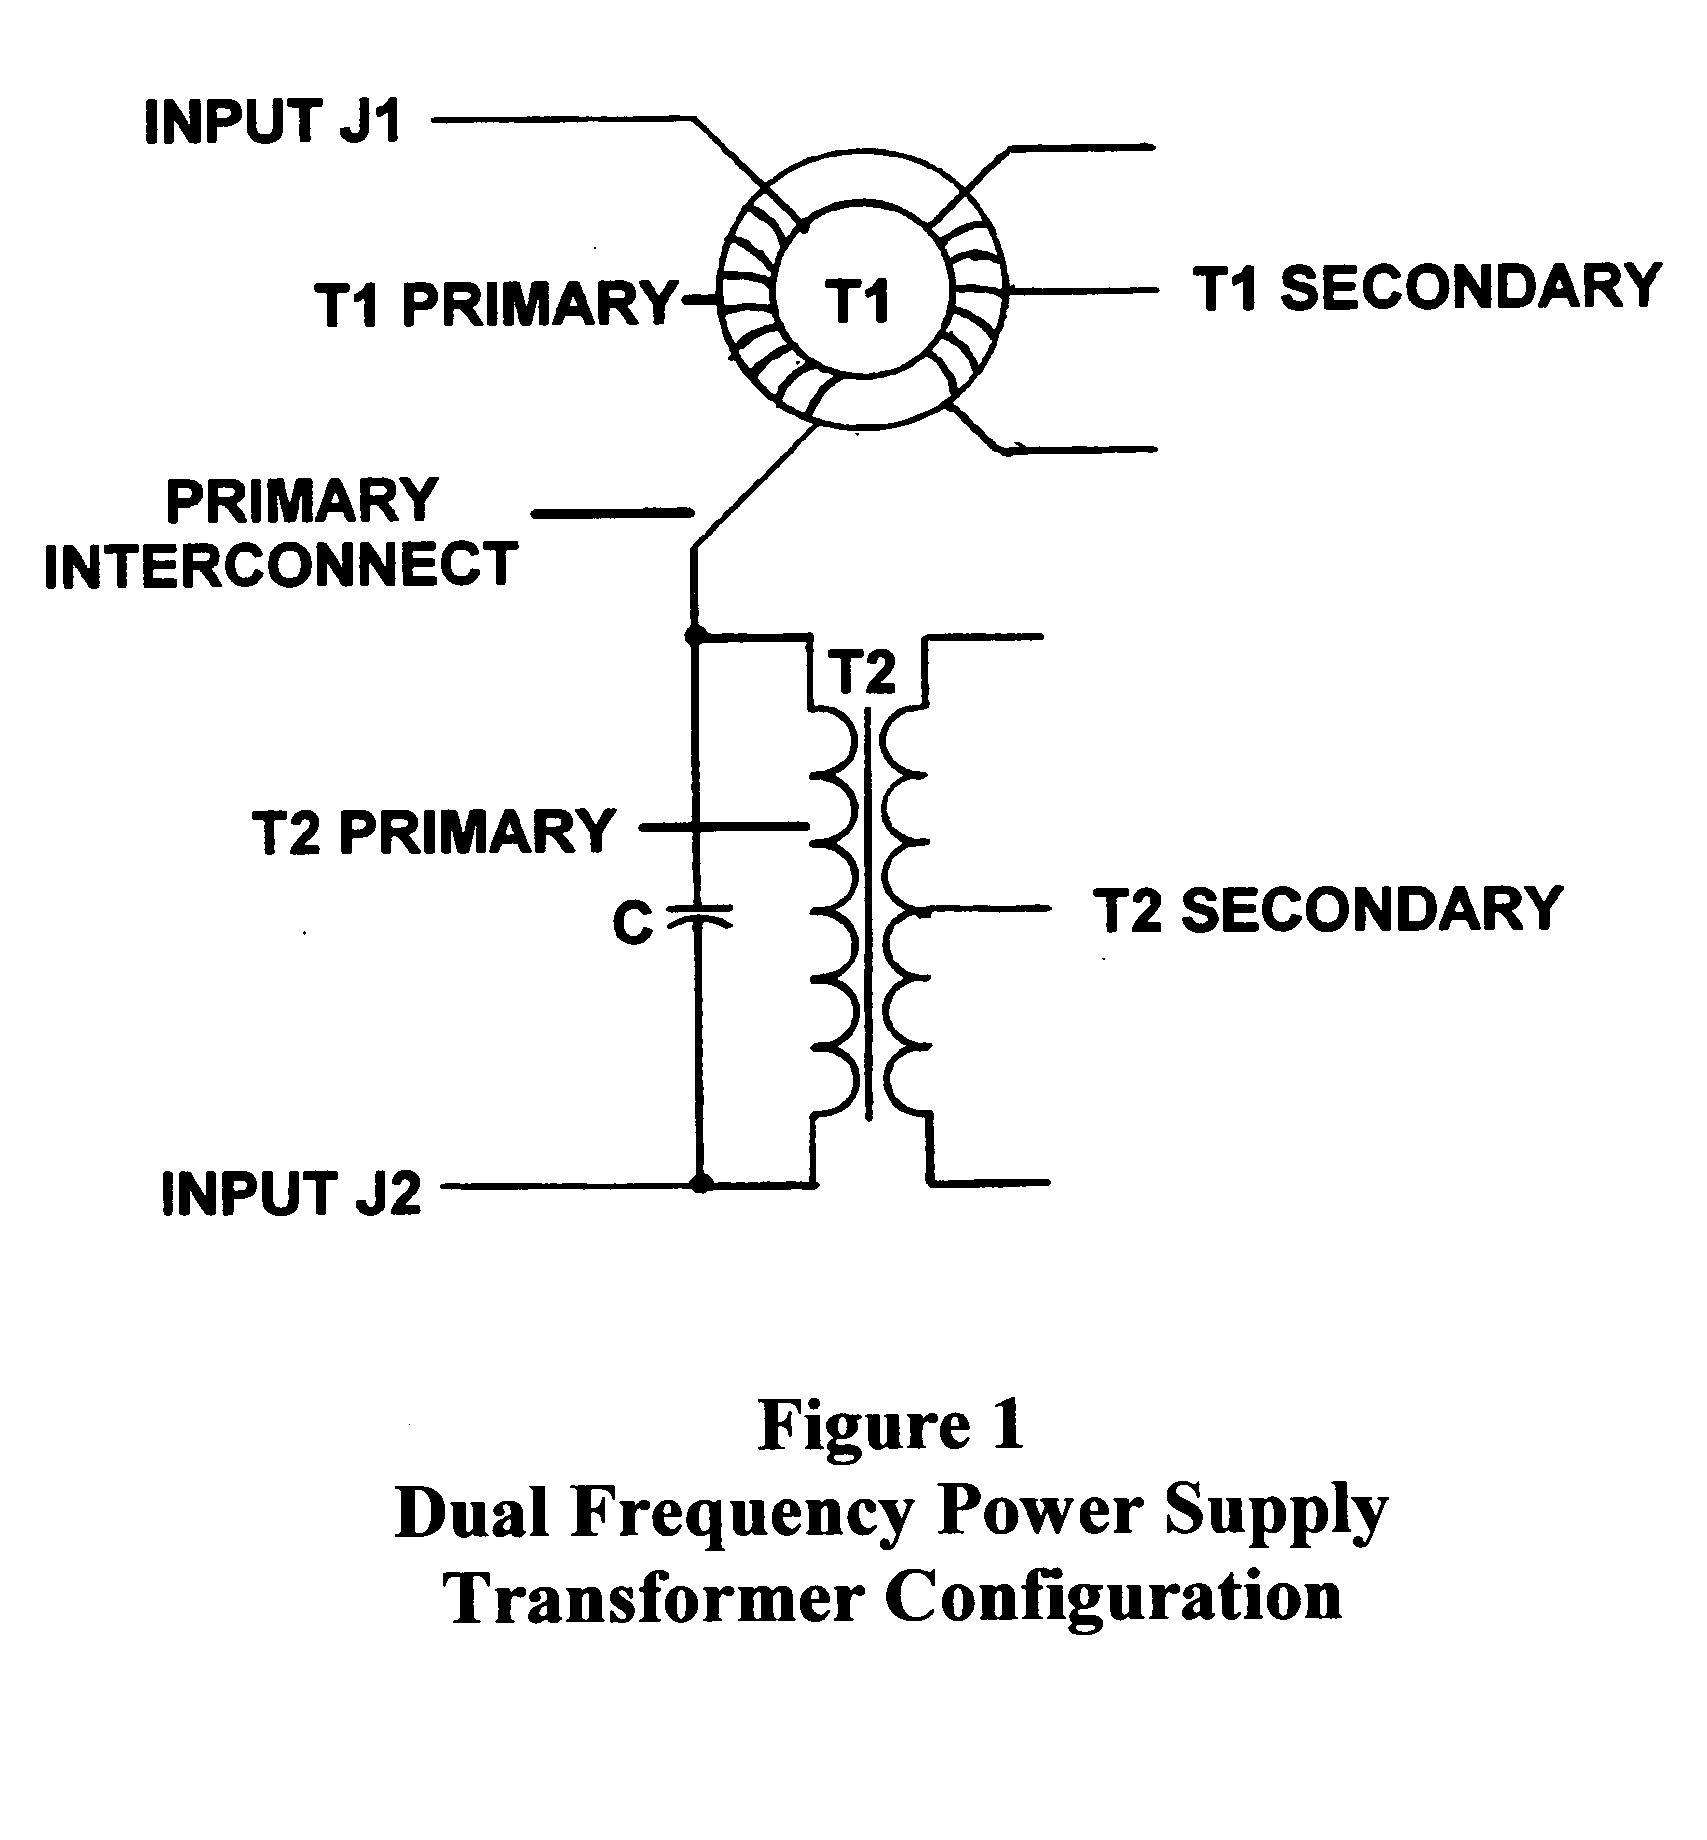 Methods and apparatus for constructing a power supply capable drawing power from fluorescent lamps